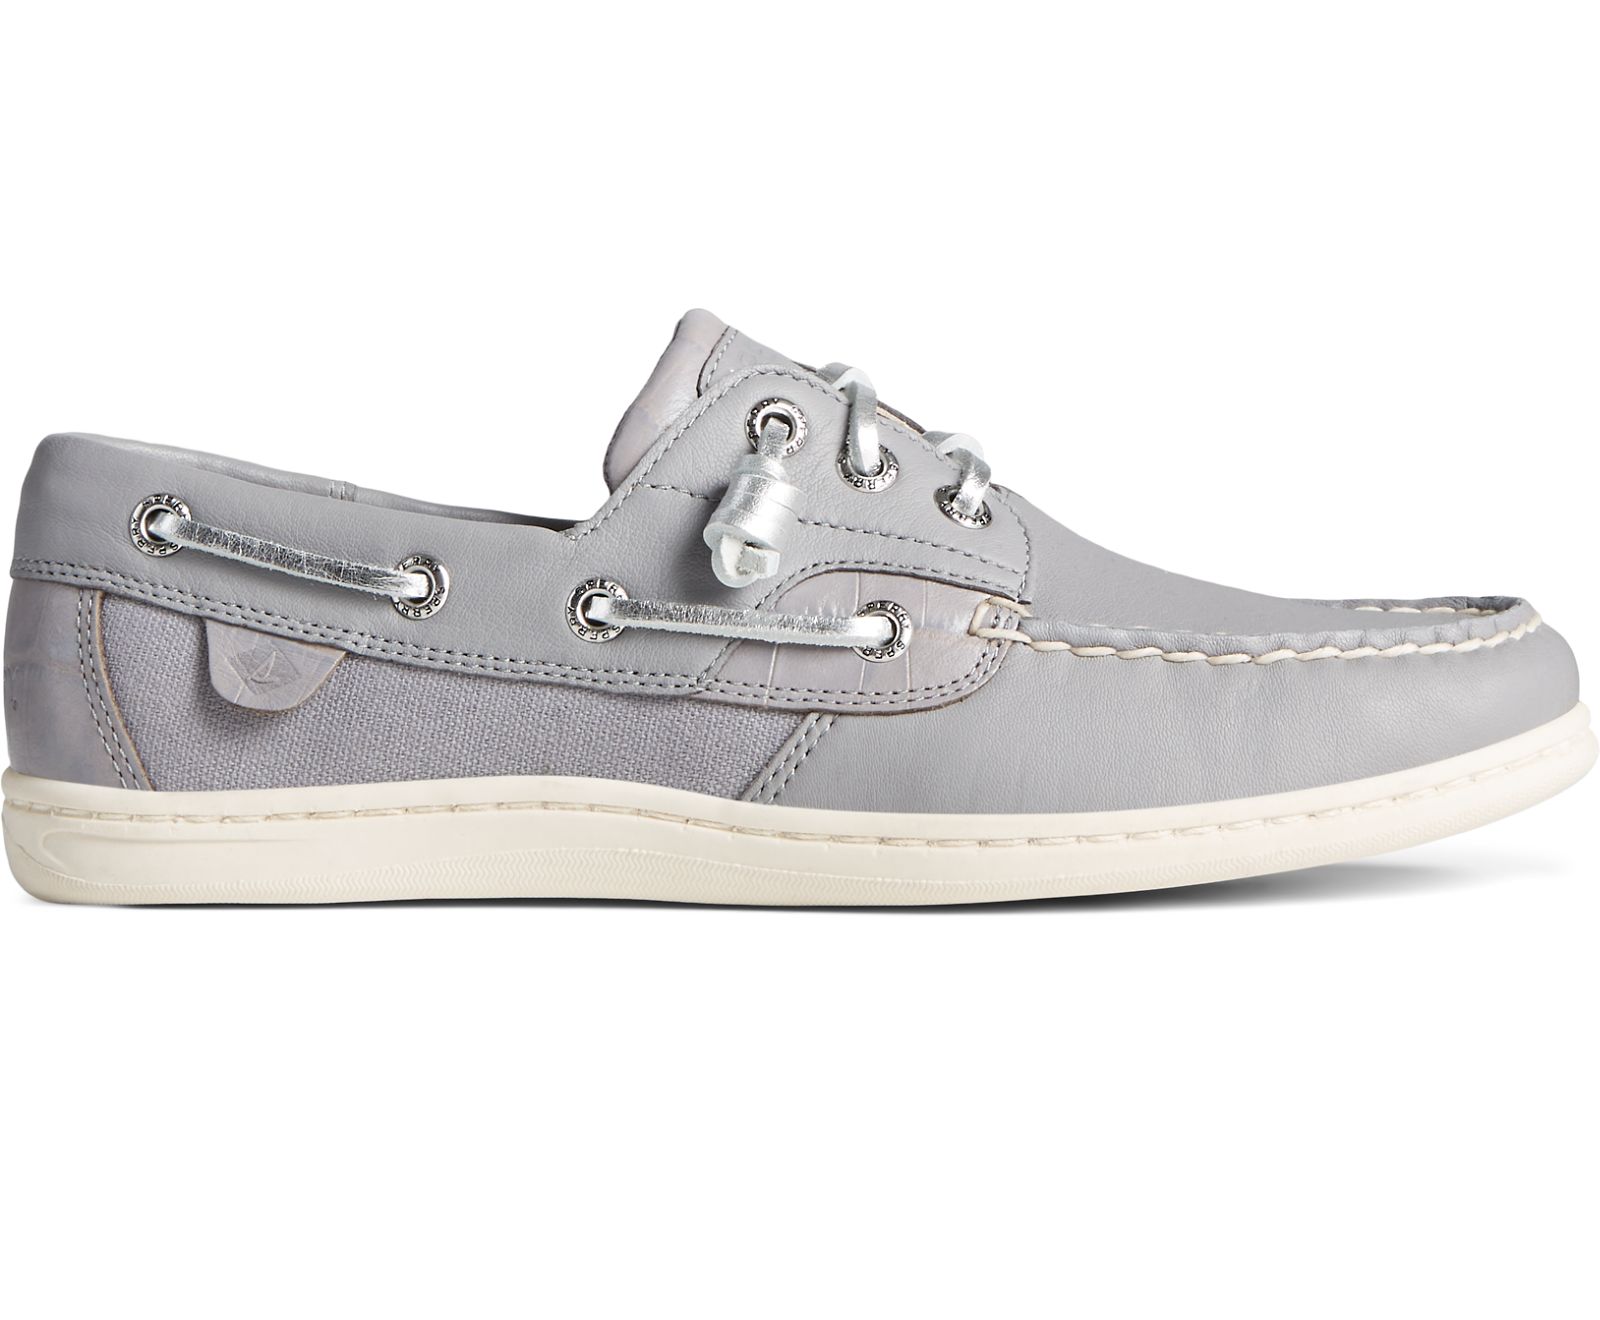 Women's Songfish Croc Leather Boat Shoe - Grey - Click Image to Close